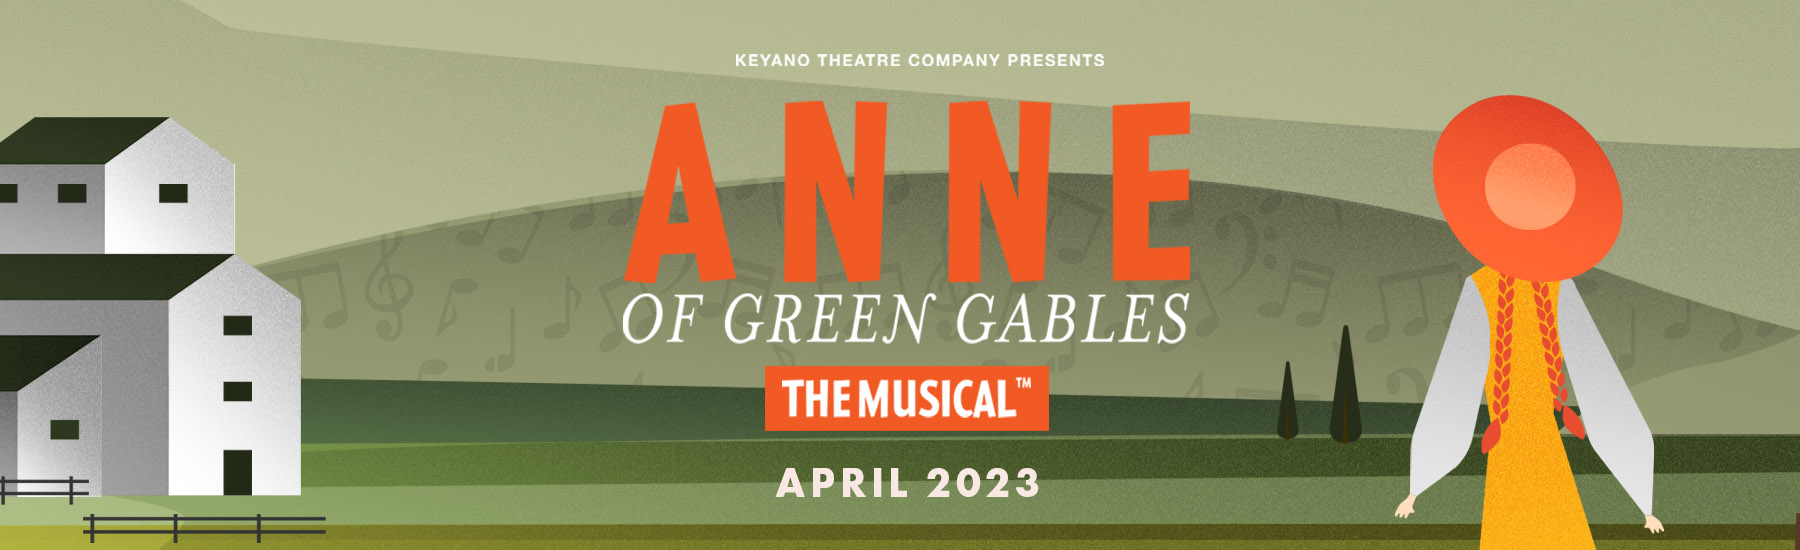 Anne of Green Gables advertisement